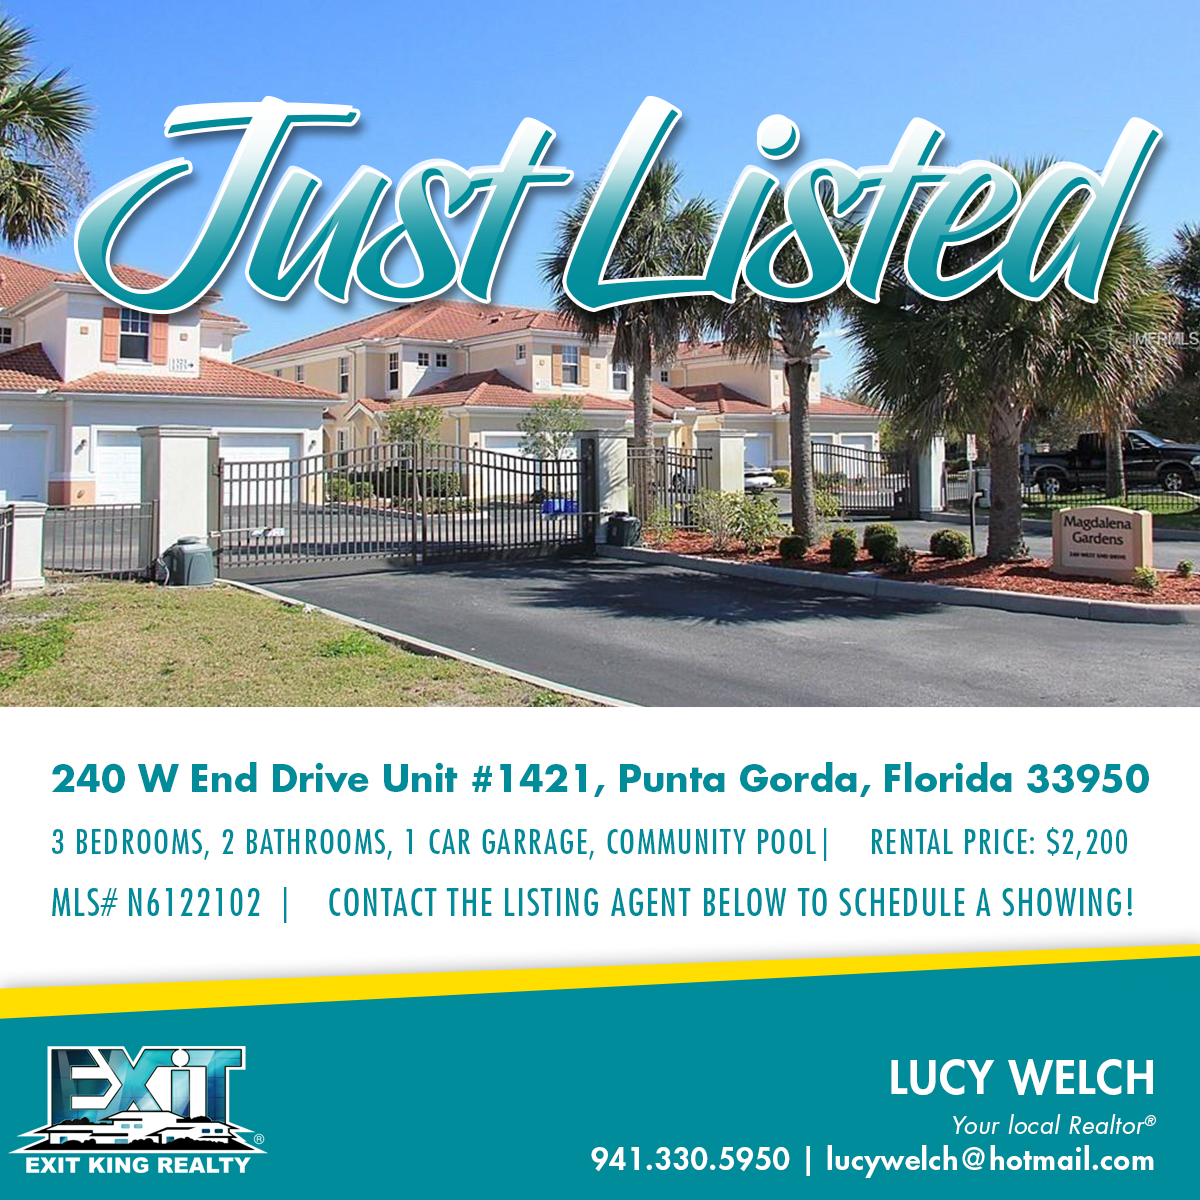 240 W End Drive Unit #1421, Punta Gorda, Florida 33950
$2,200
 Easy access to I75 and US 41. Few minutes distance to Fisherman Village, Charlotte Bay, restaurants, shops and many more.
MLS Number: N6122102
#exitking #realty #homeforsale #PuntaGordarealestate #PuntaGordarealtor